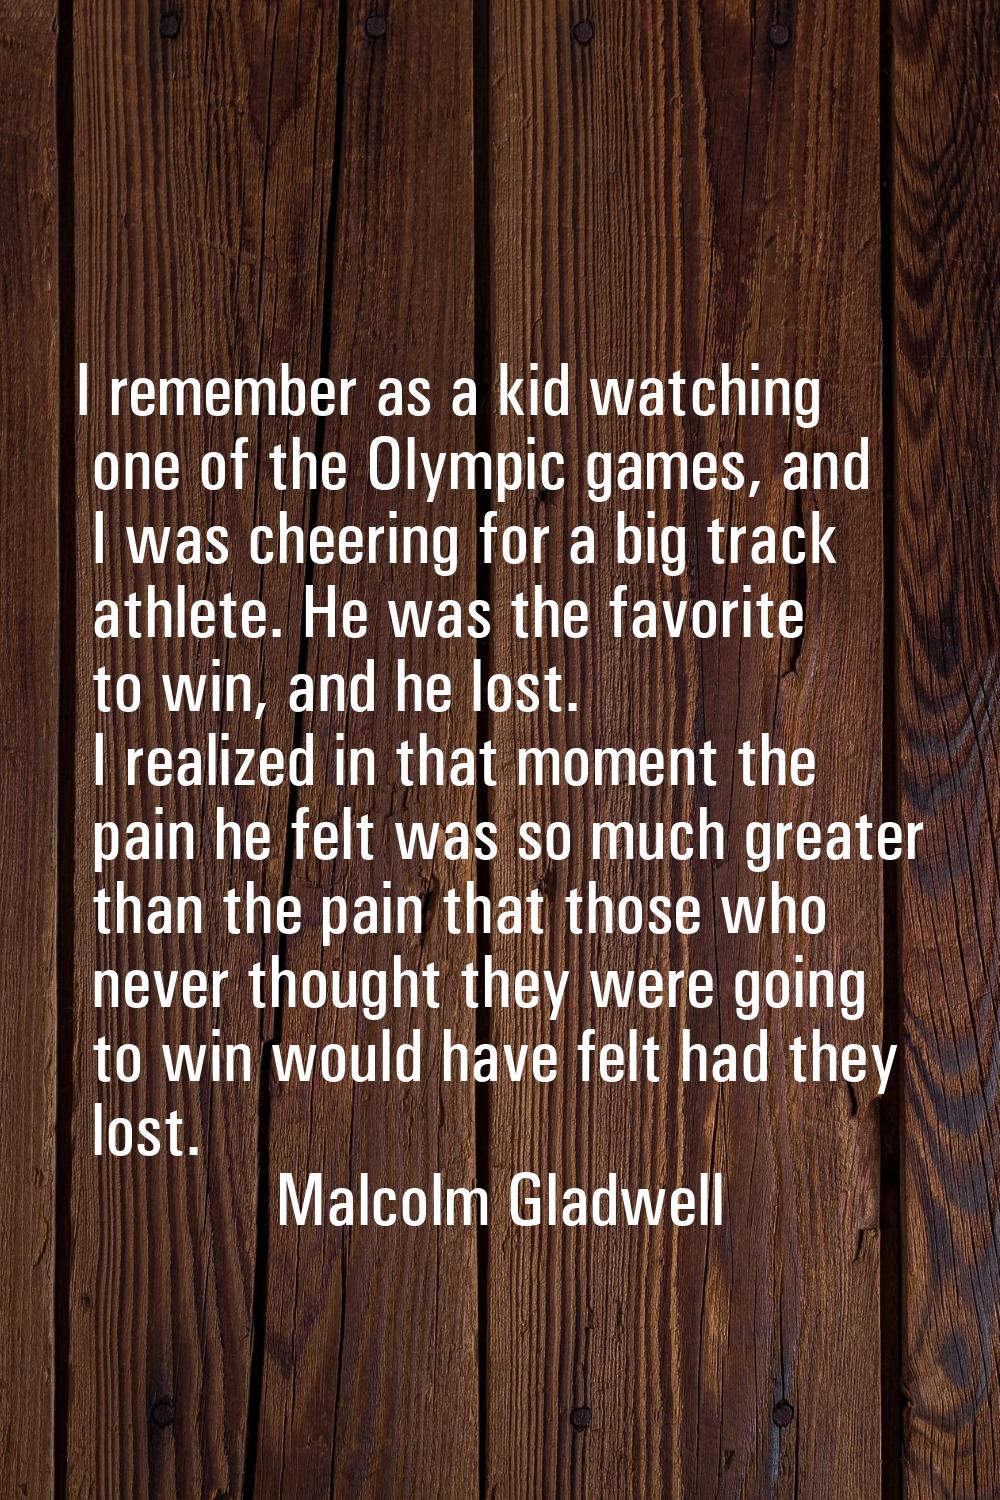 I remember as a kid watching one of the Olympic games, and I was cheering for a big track athlete. 